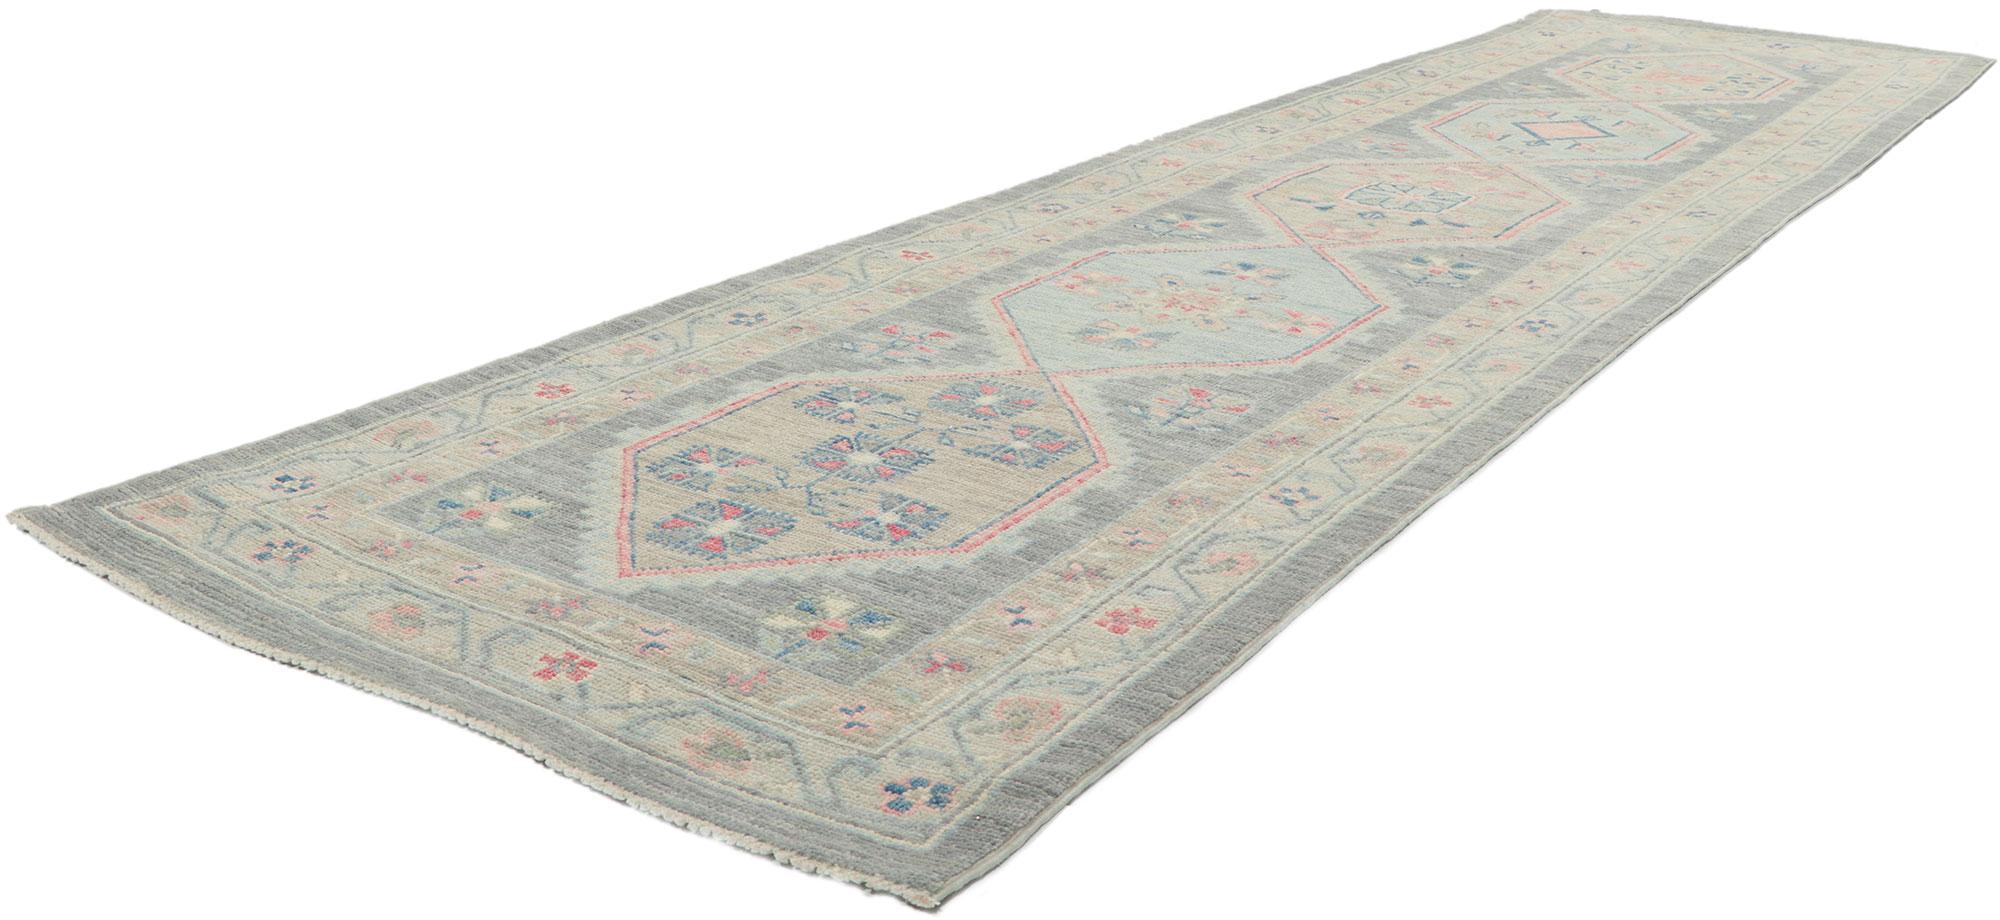 80835 New Contemporary Oushak Runner with Soft Colors, 02'08 x 10'00. The classic style and soft colors are tranquil and sophisticated. With its timeless design and understated elegance, this versatile Oushak carpet runner will create a welcoming